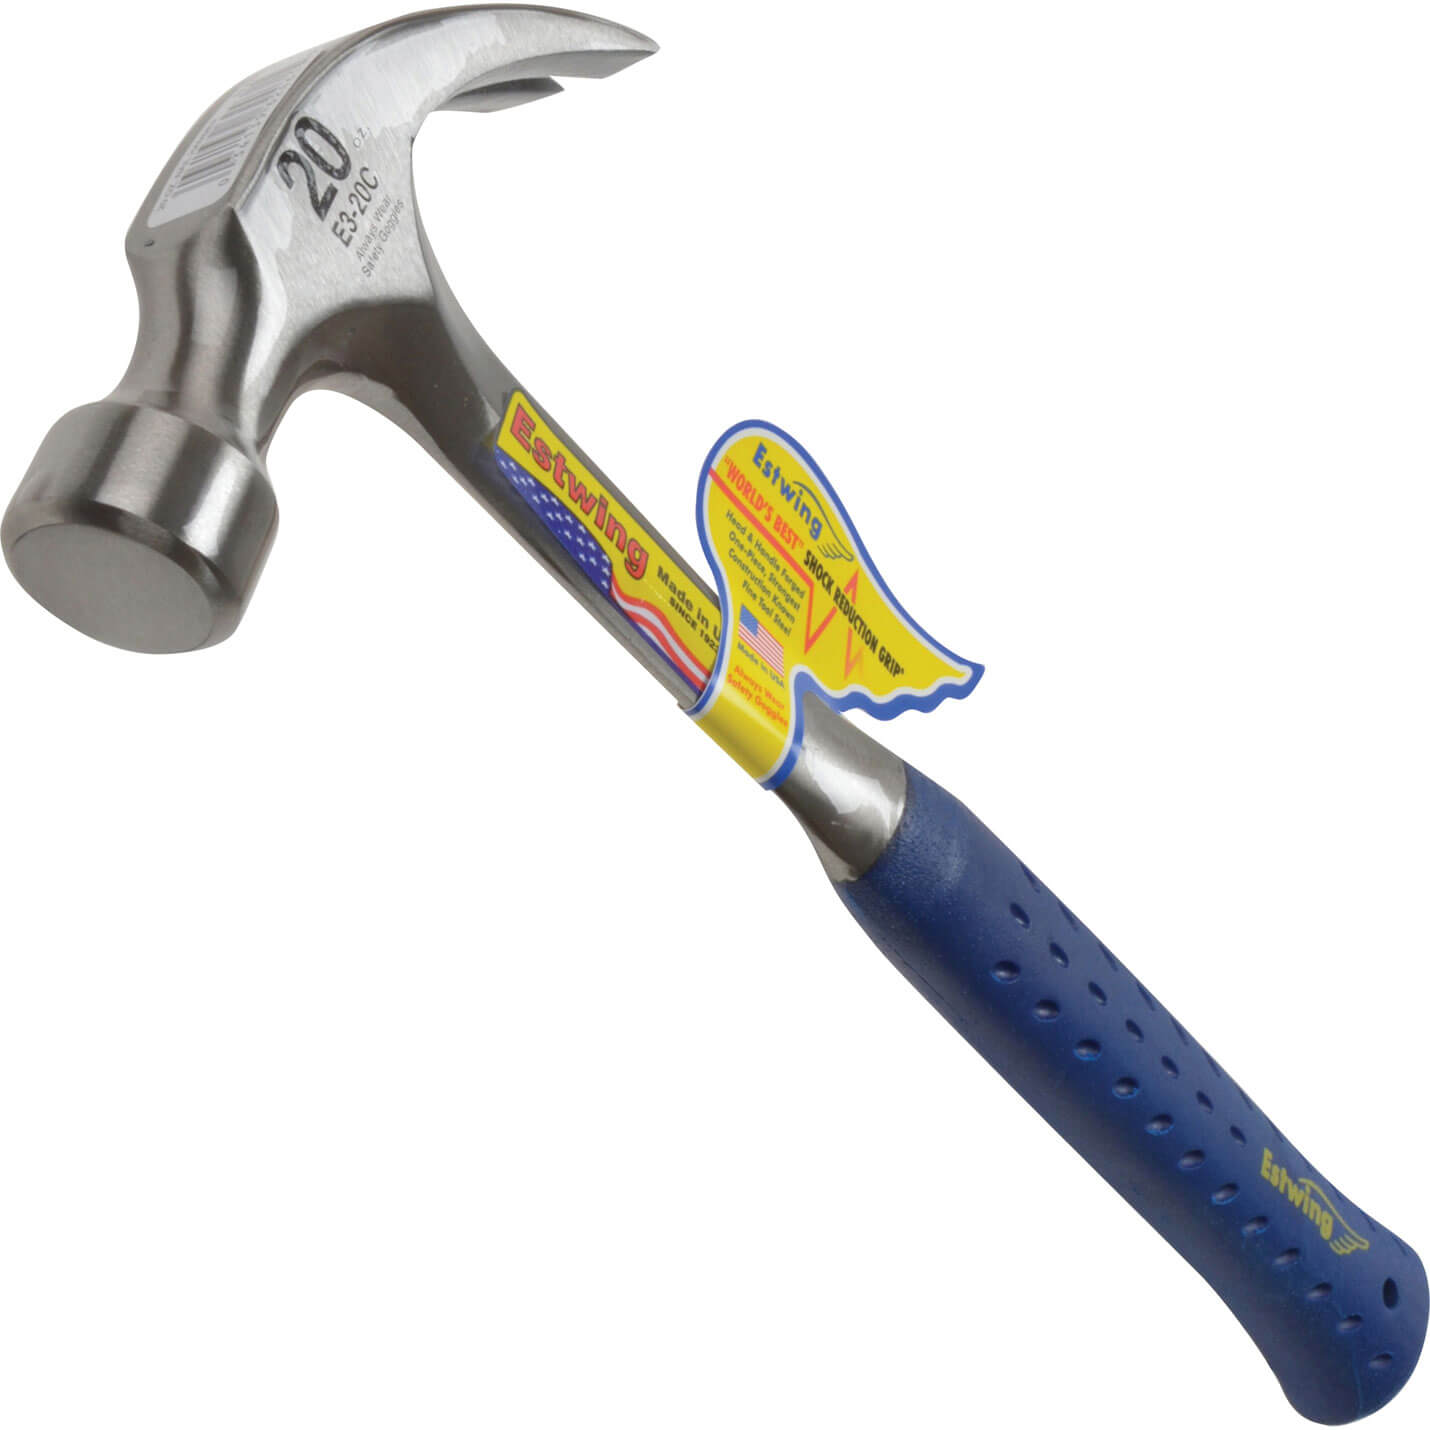 Image of Estwing Curved Claw Hammer 560g